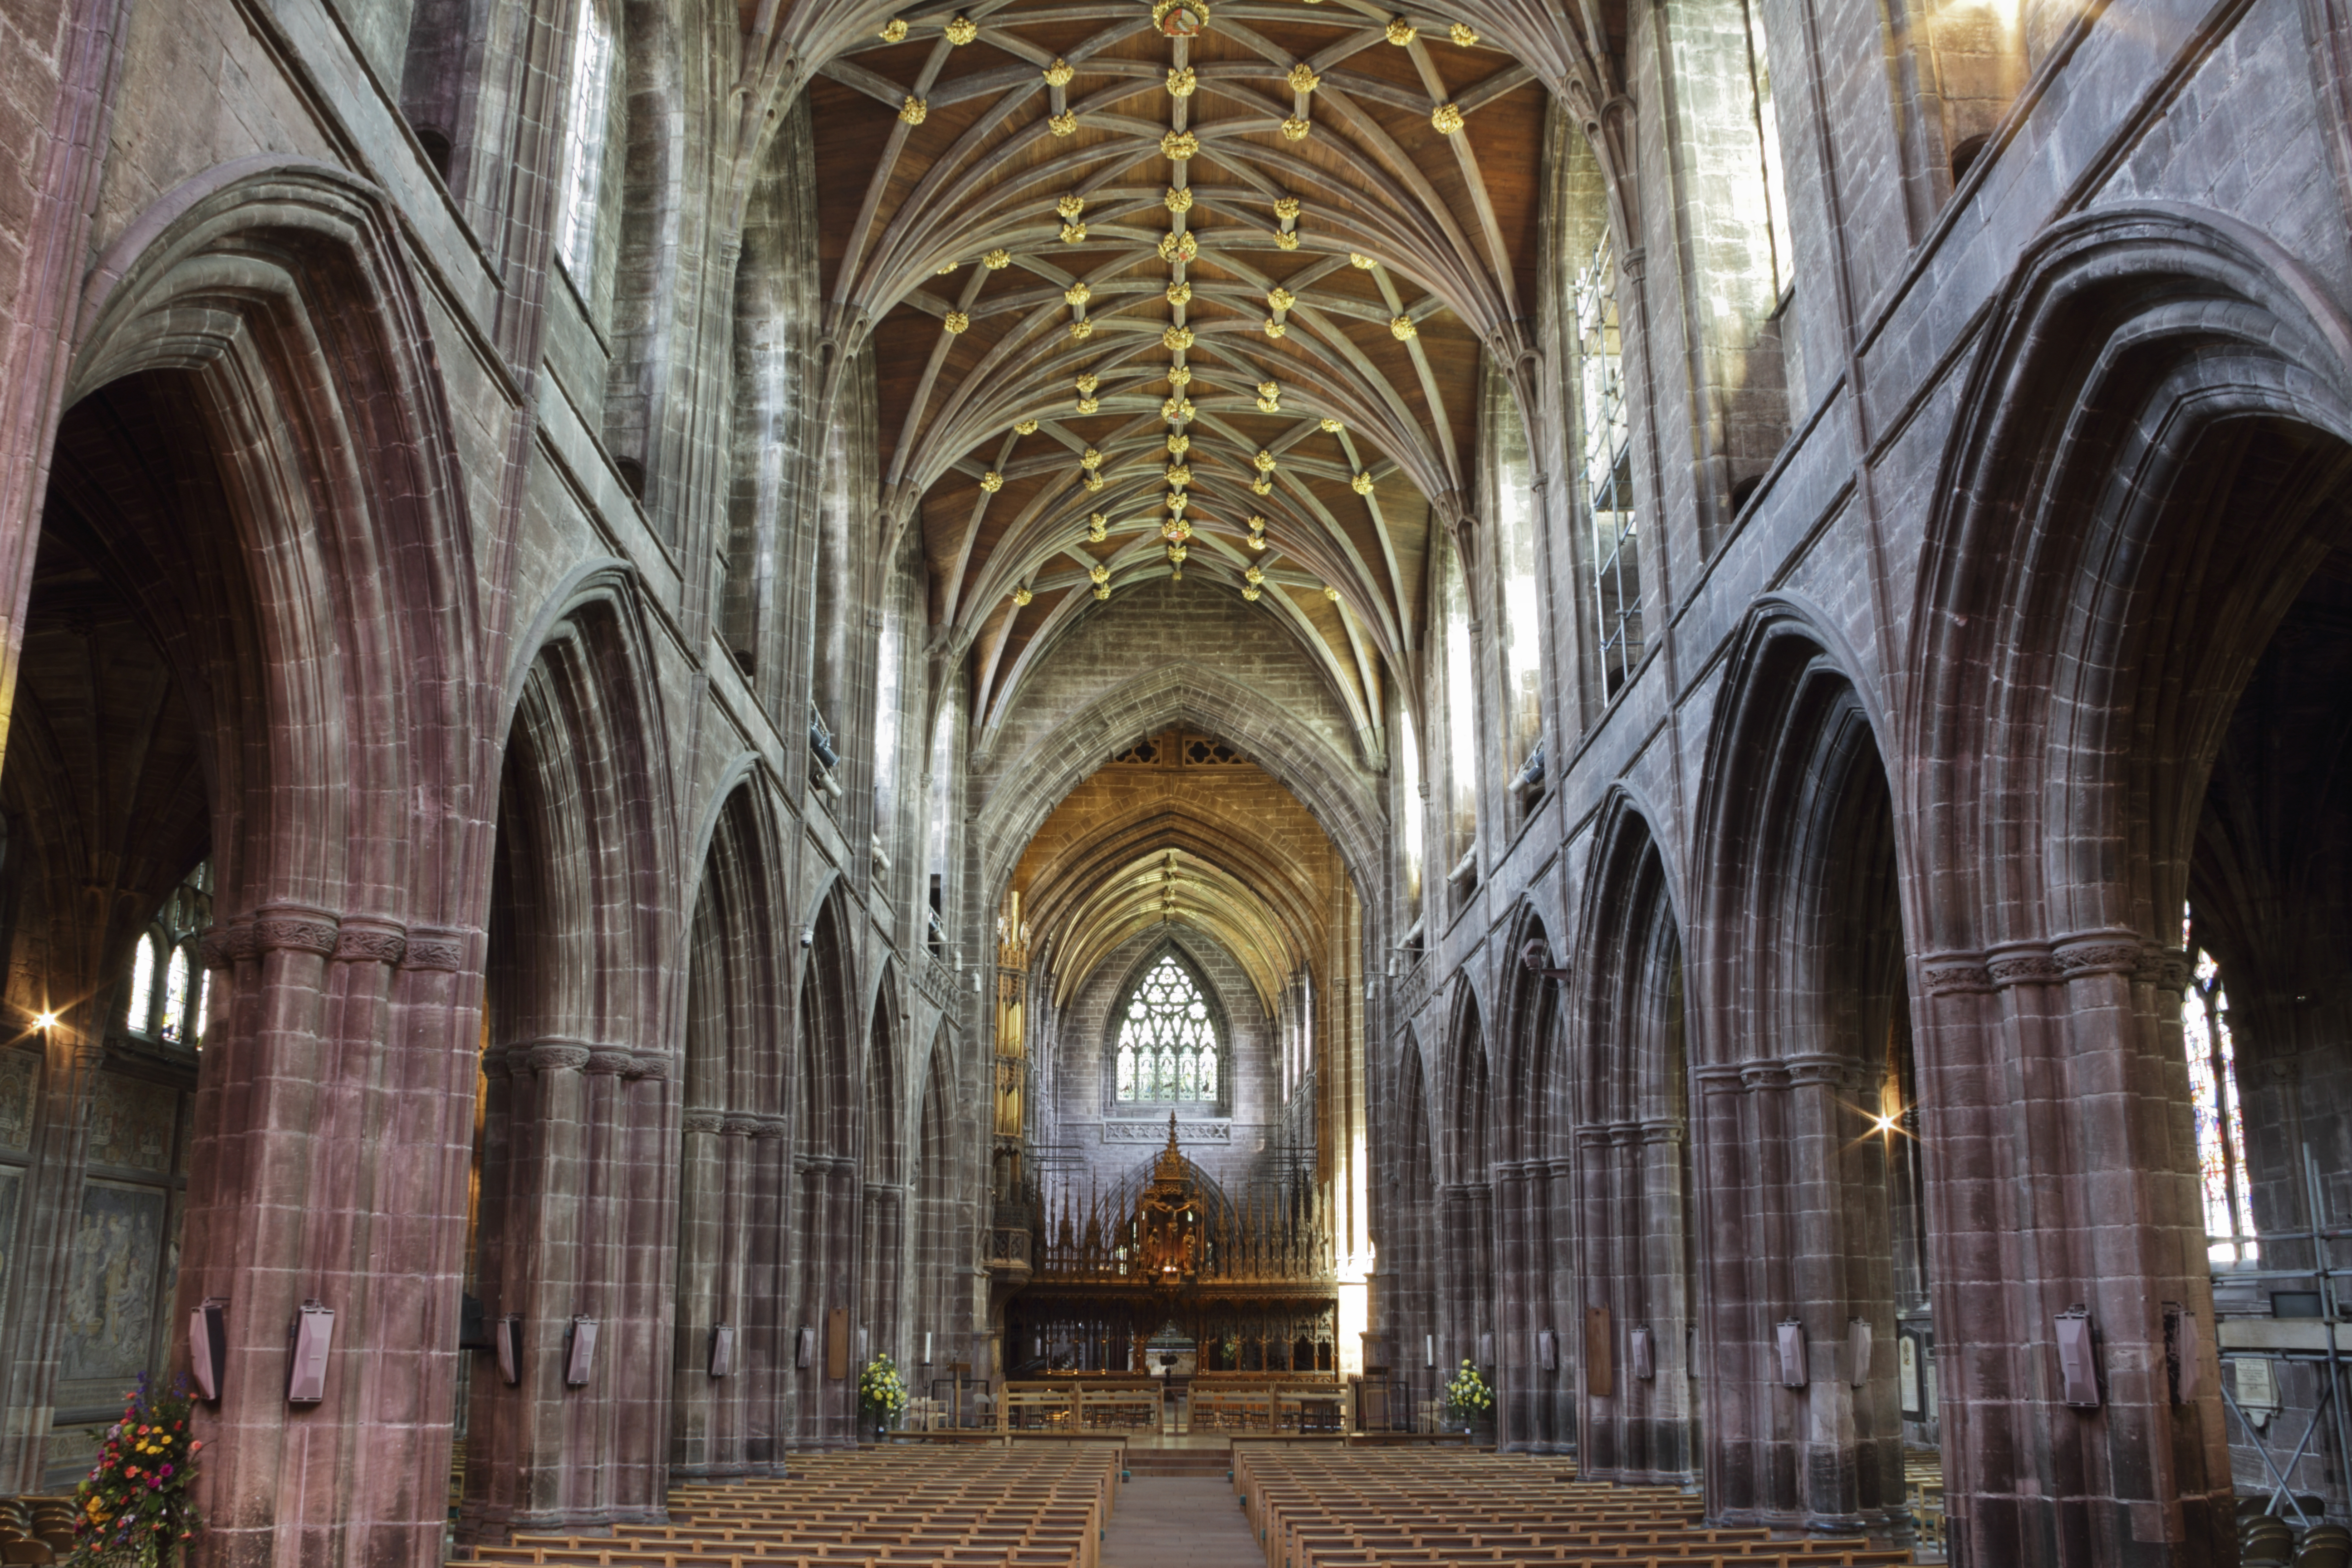 File:Chester Cathedral (7251396712).jpg - Wikimedia Commons